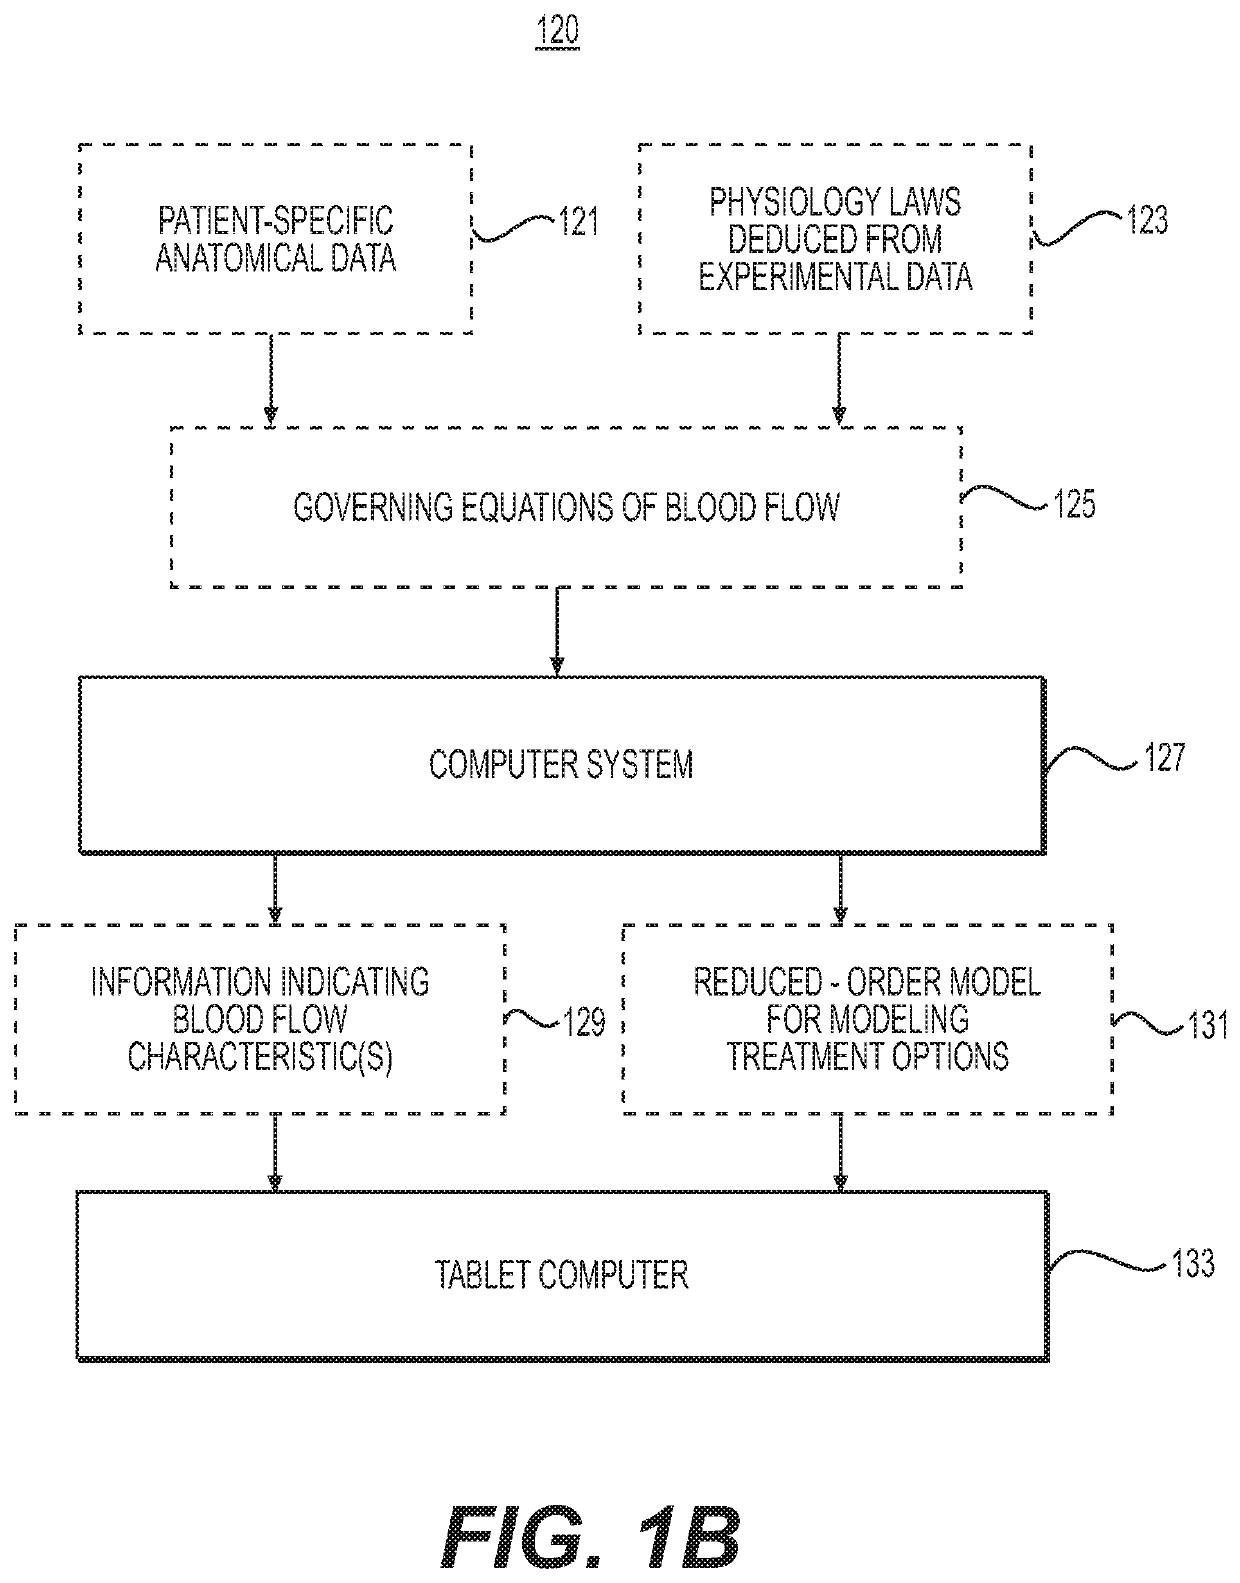 Systems and methods for generating an anonymous interactive display in an extended timeout period